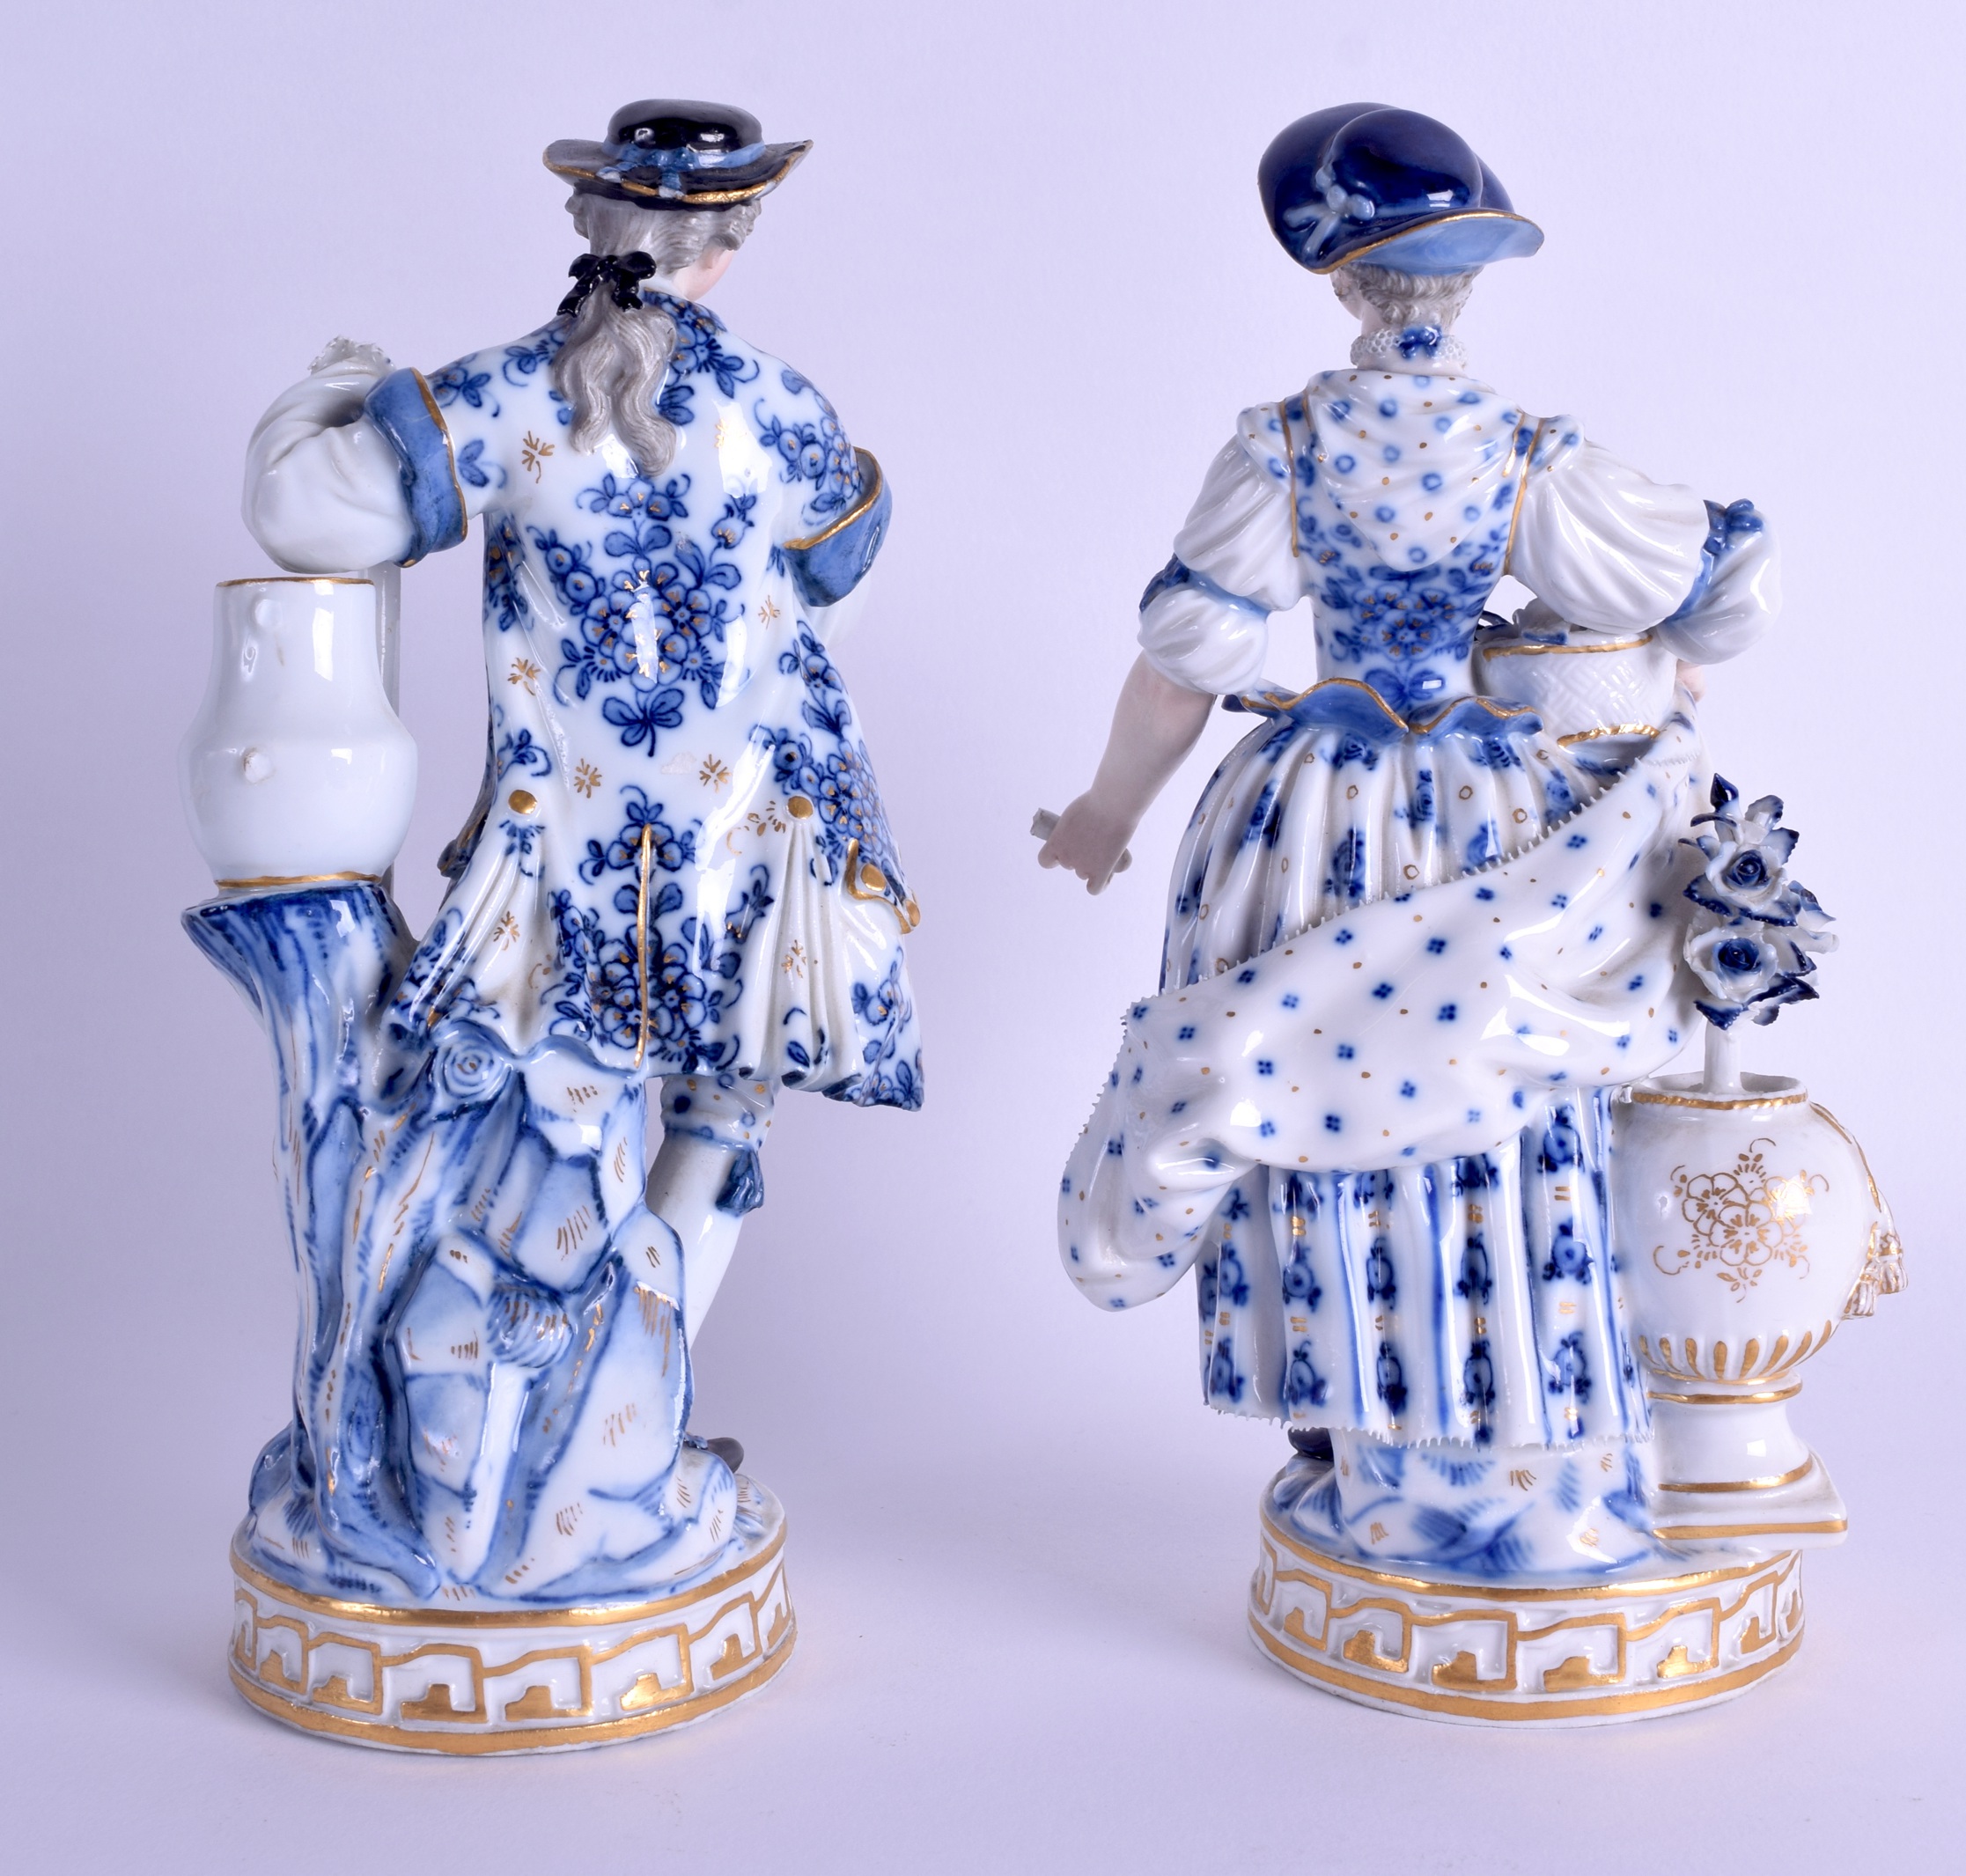 A PAIR OF 19TH CENTURY MEISSEN PORCELAIN FIGURES OF GARDENERS painted with blue flowers. 19 cm - Image 2 of 3